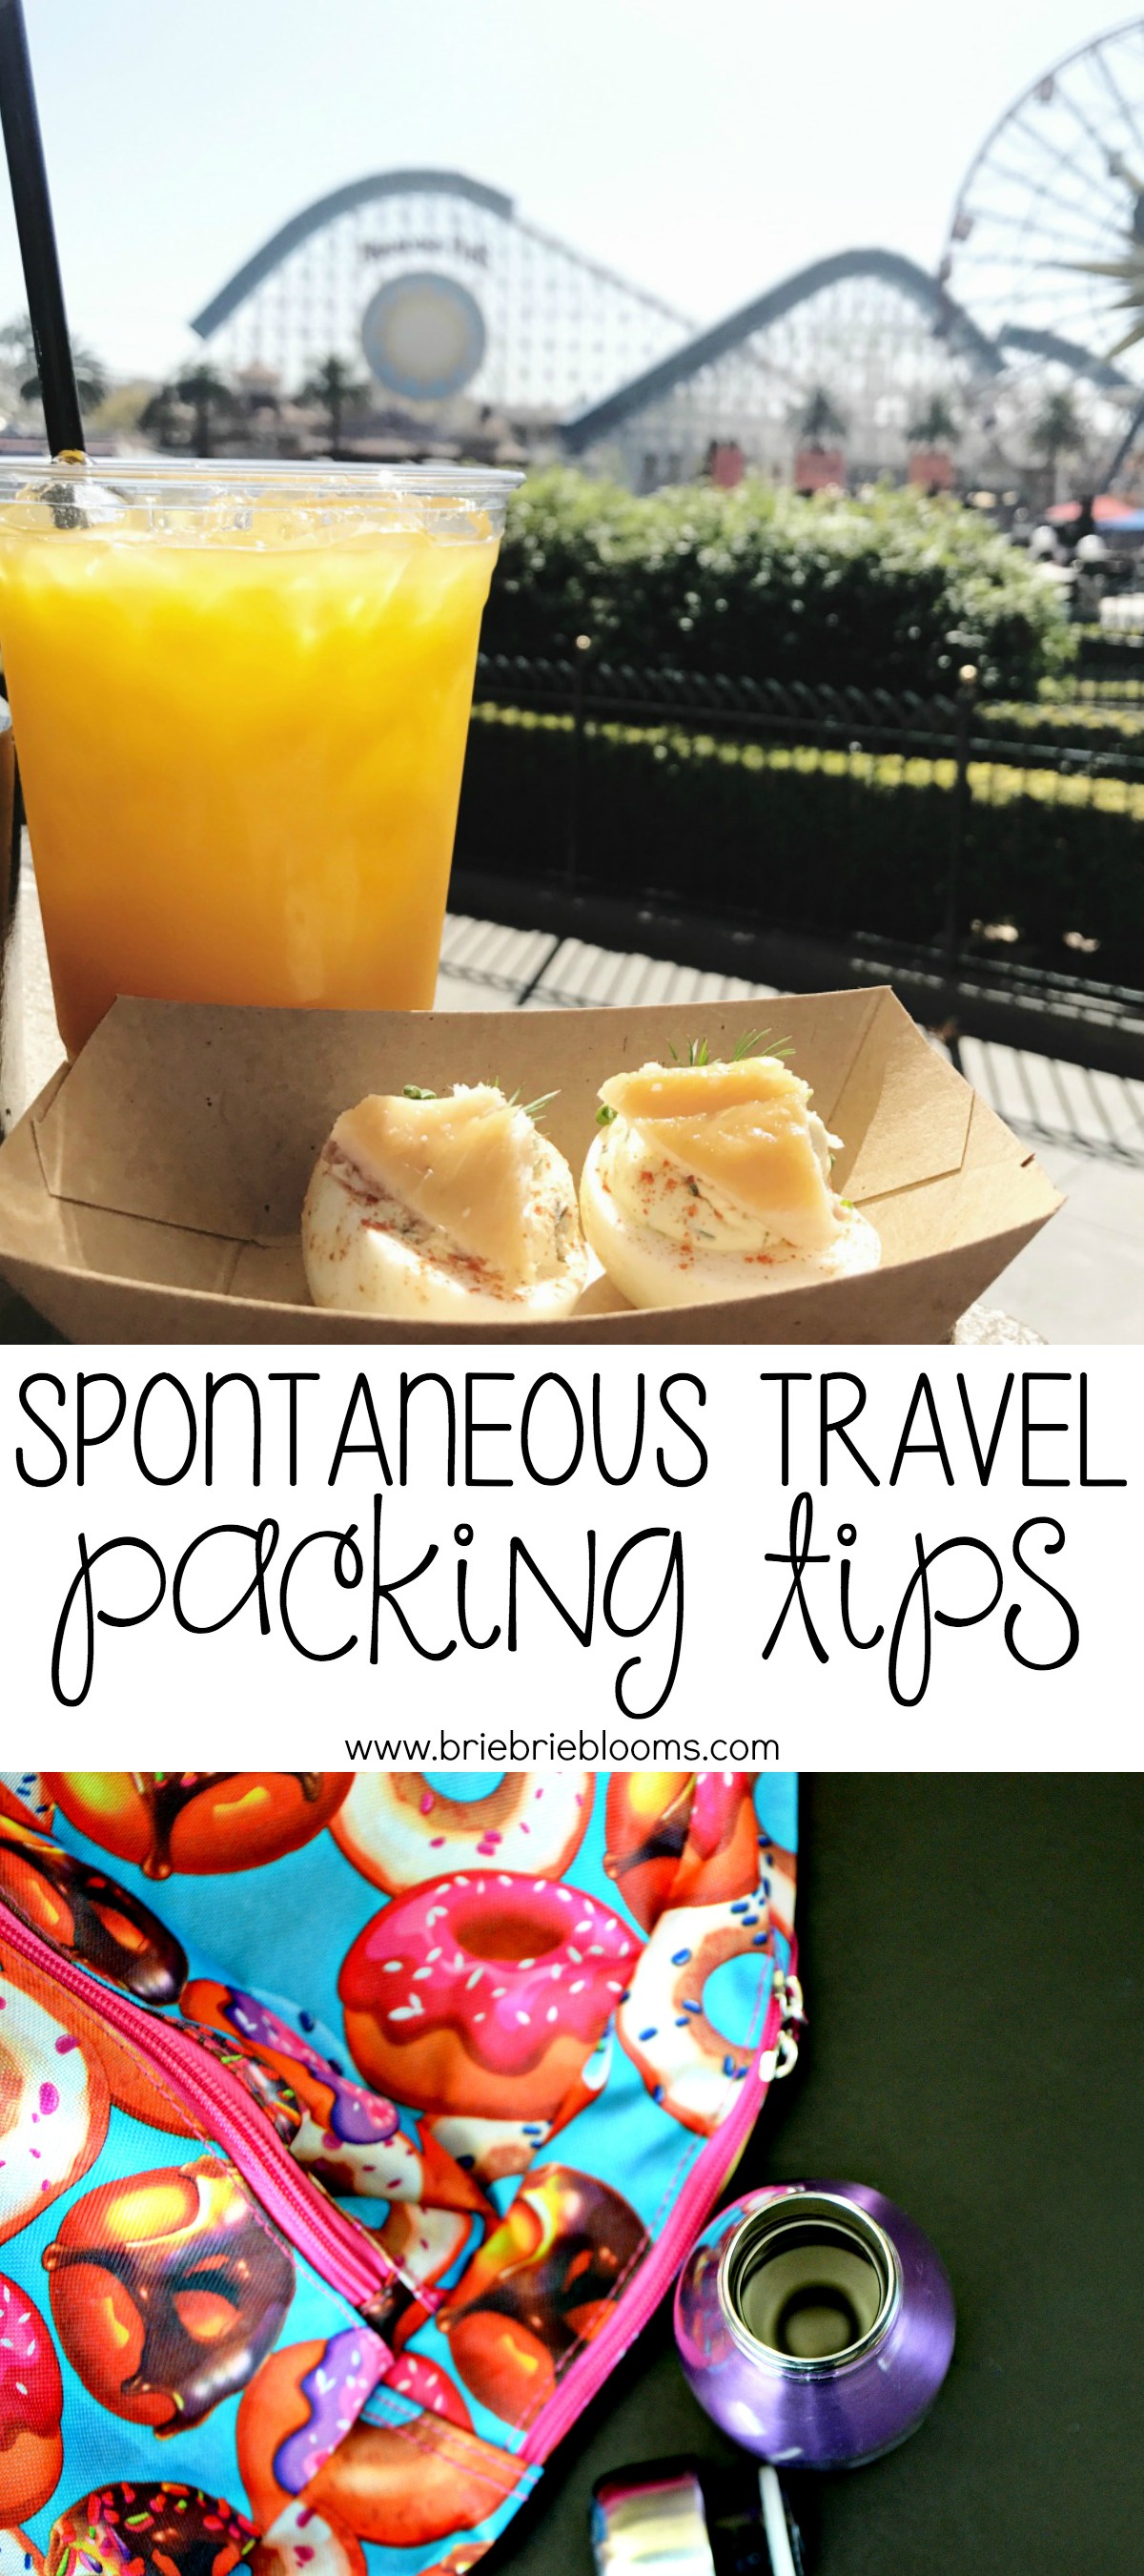 There's so many things you might forget when getting ready for spontaneous travel. These packing tips include all the little things often left at home.